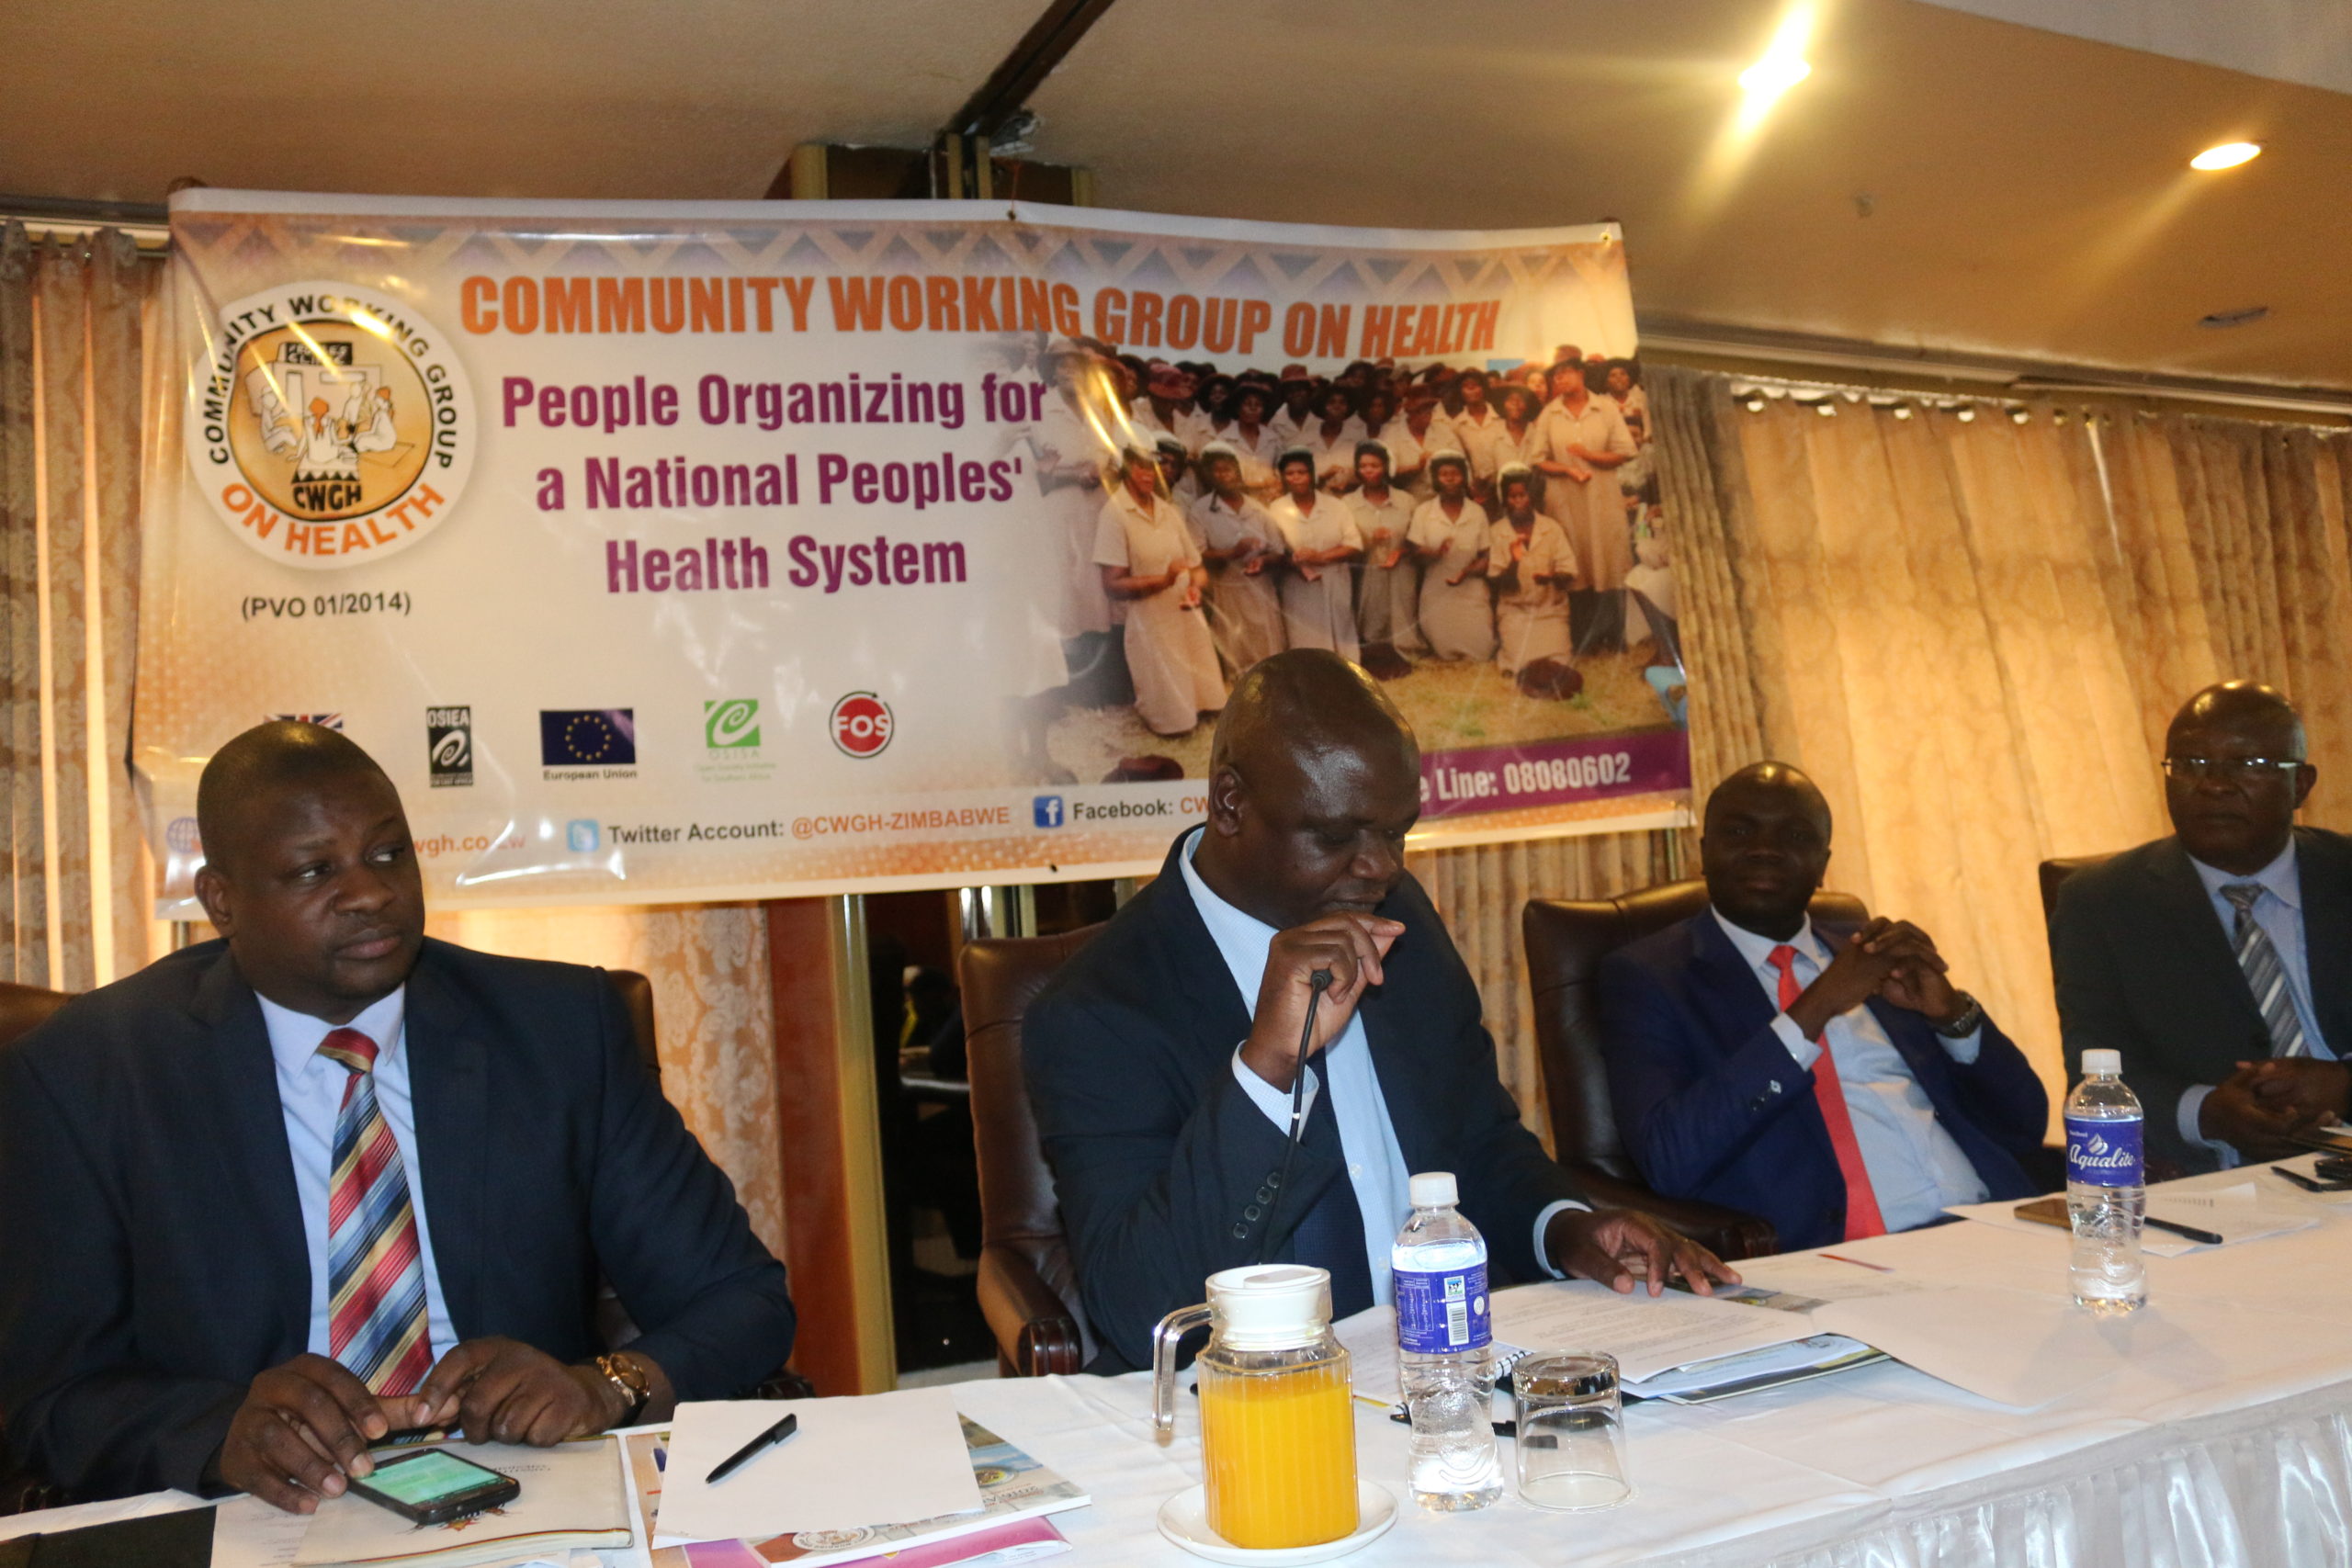 Health is a right for all: stakeholders